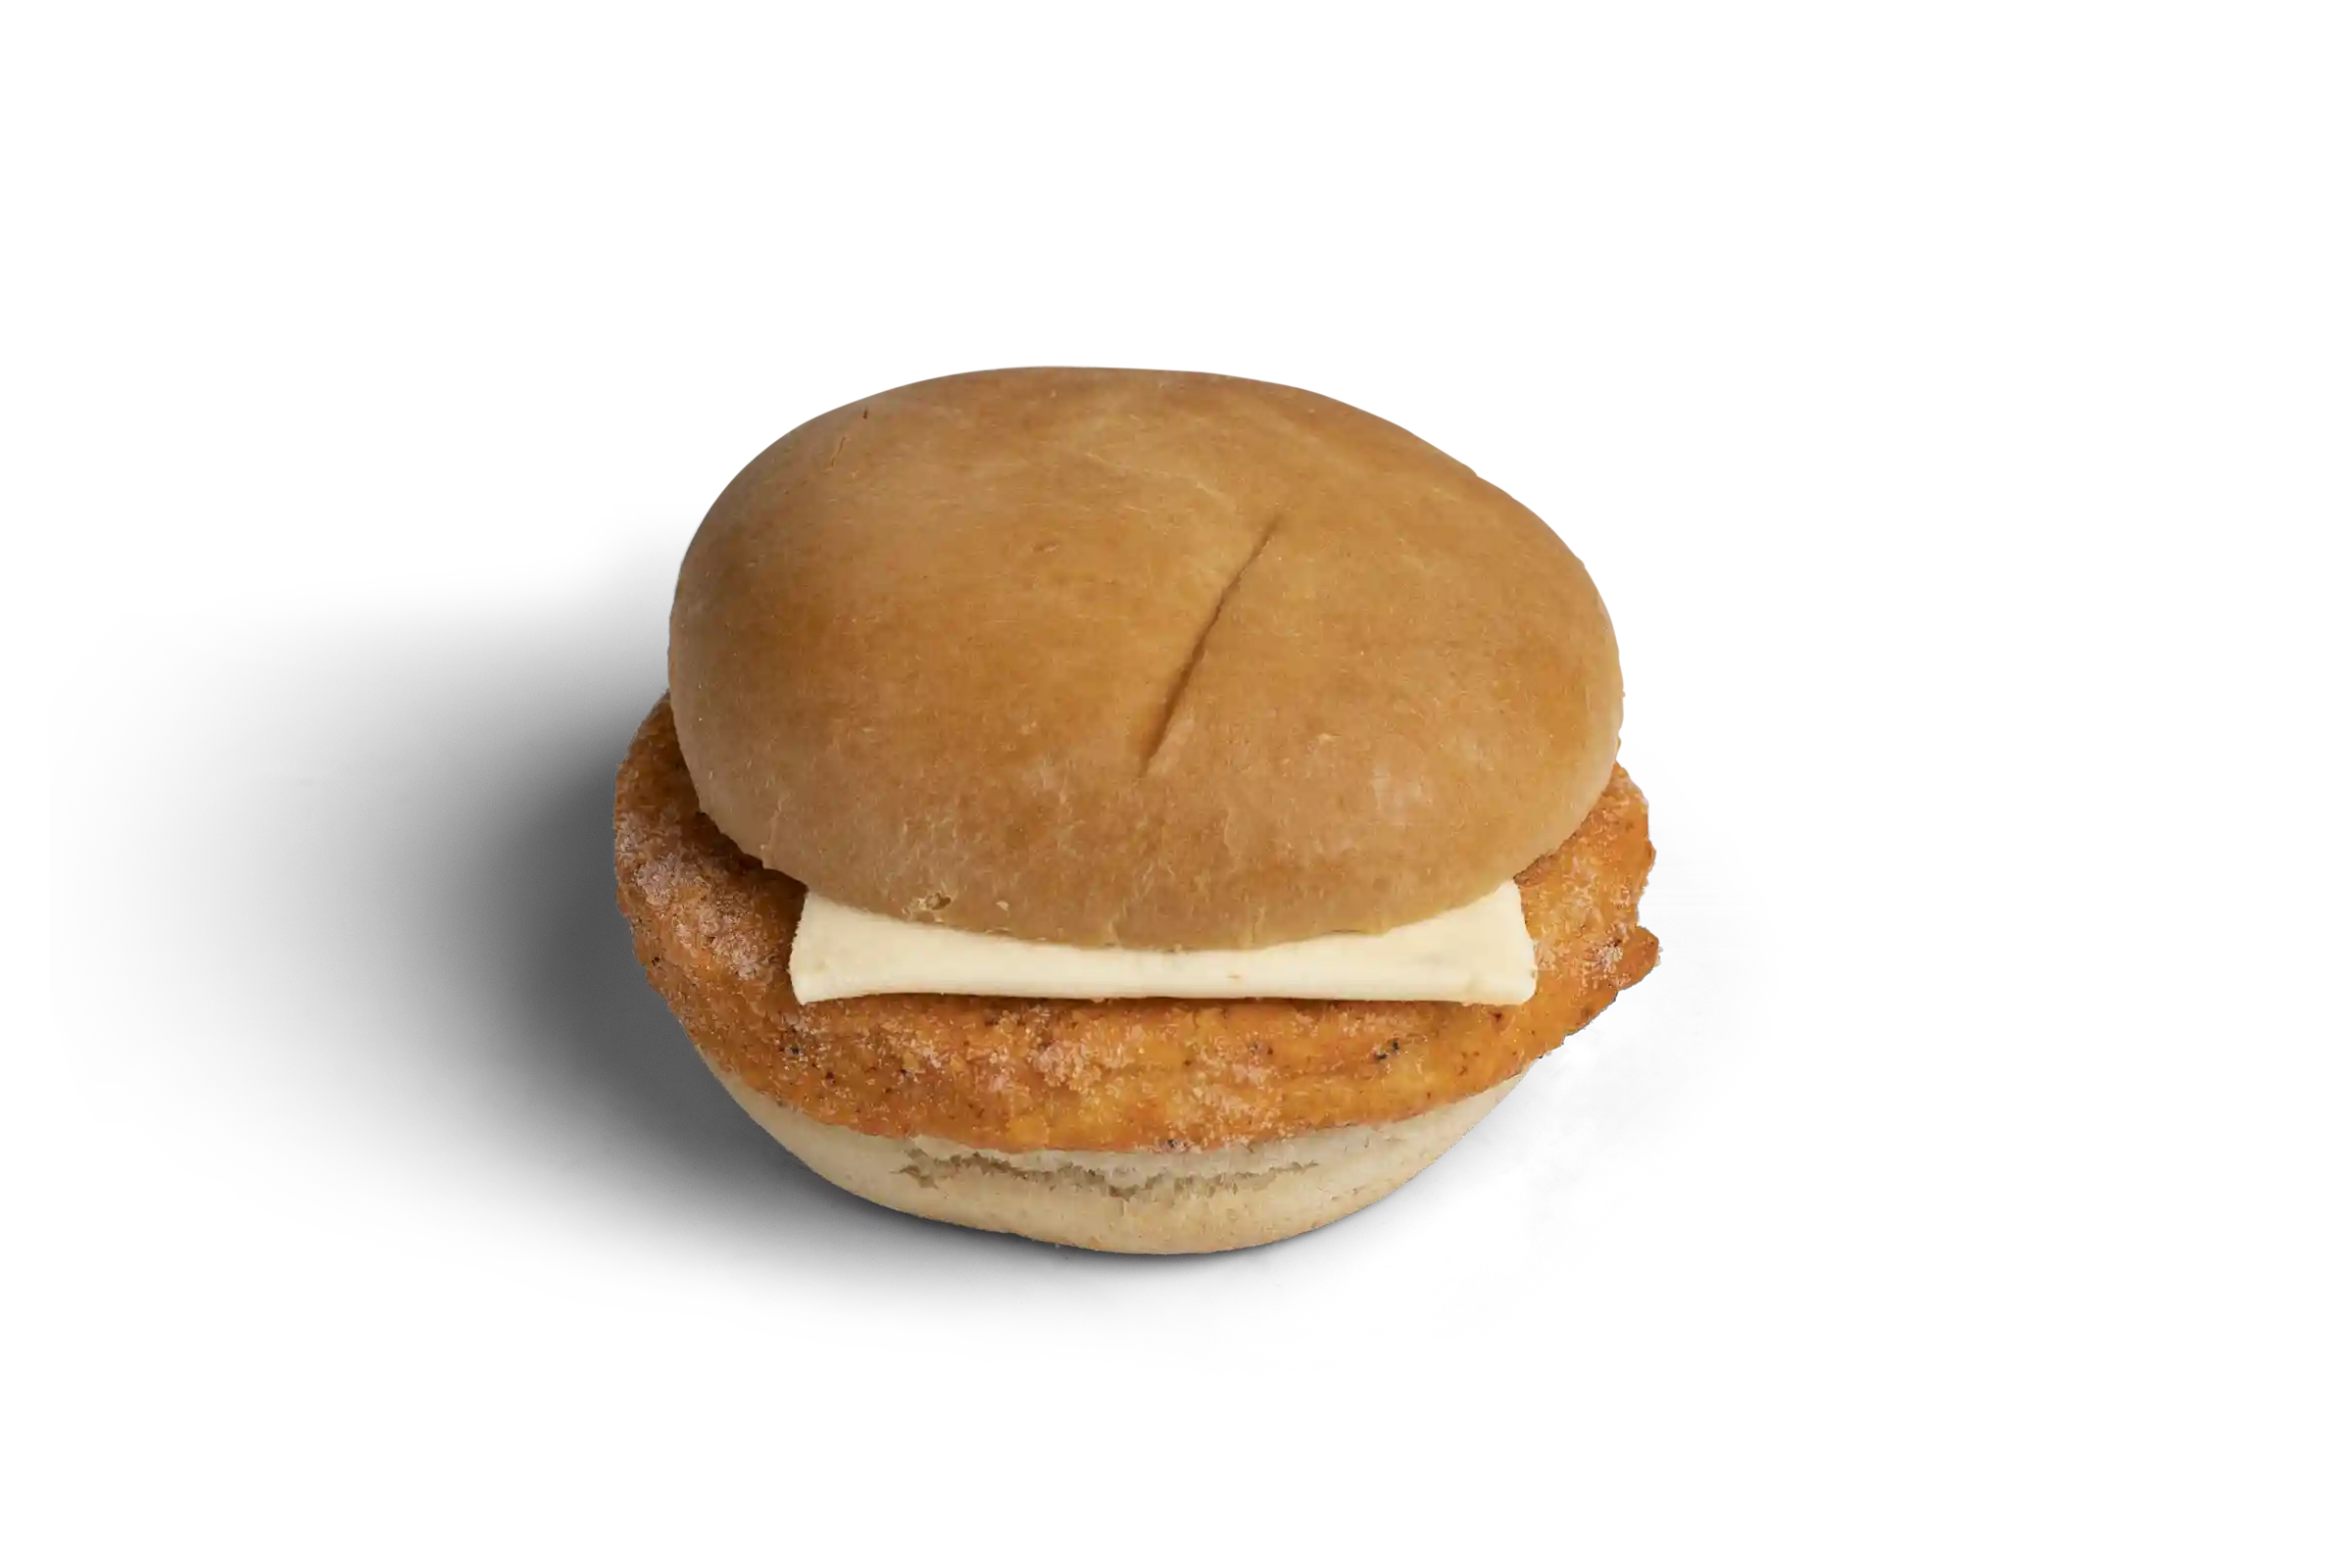 Tyson® Spicy Chicken Sandwich with Pepper Jack Cheese on a Bun_image_11